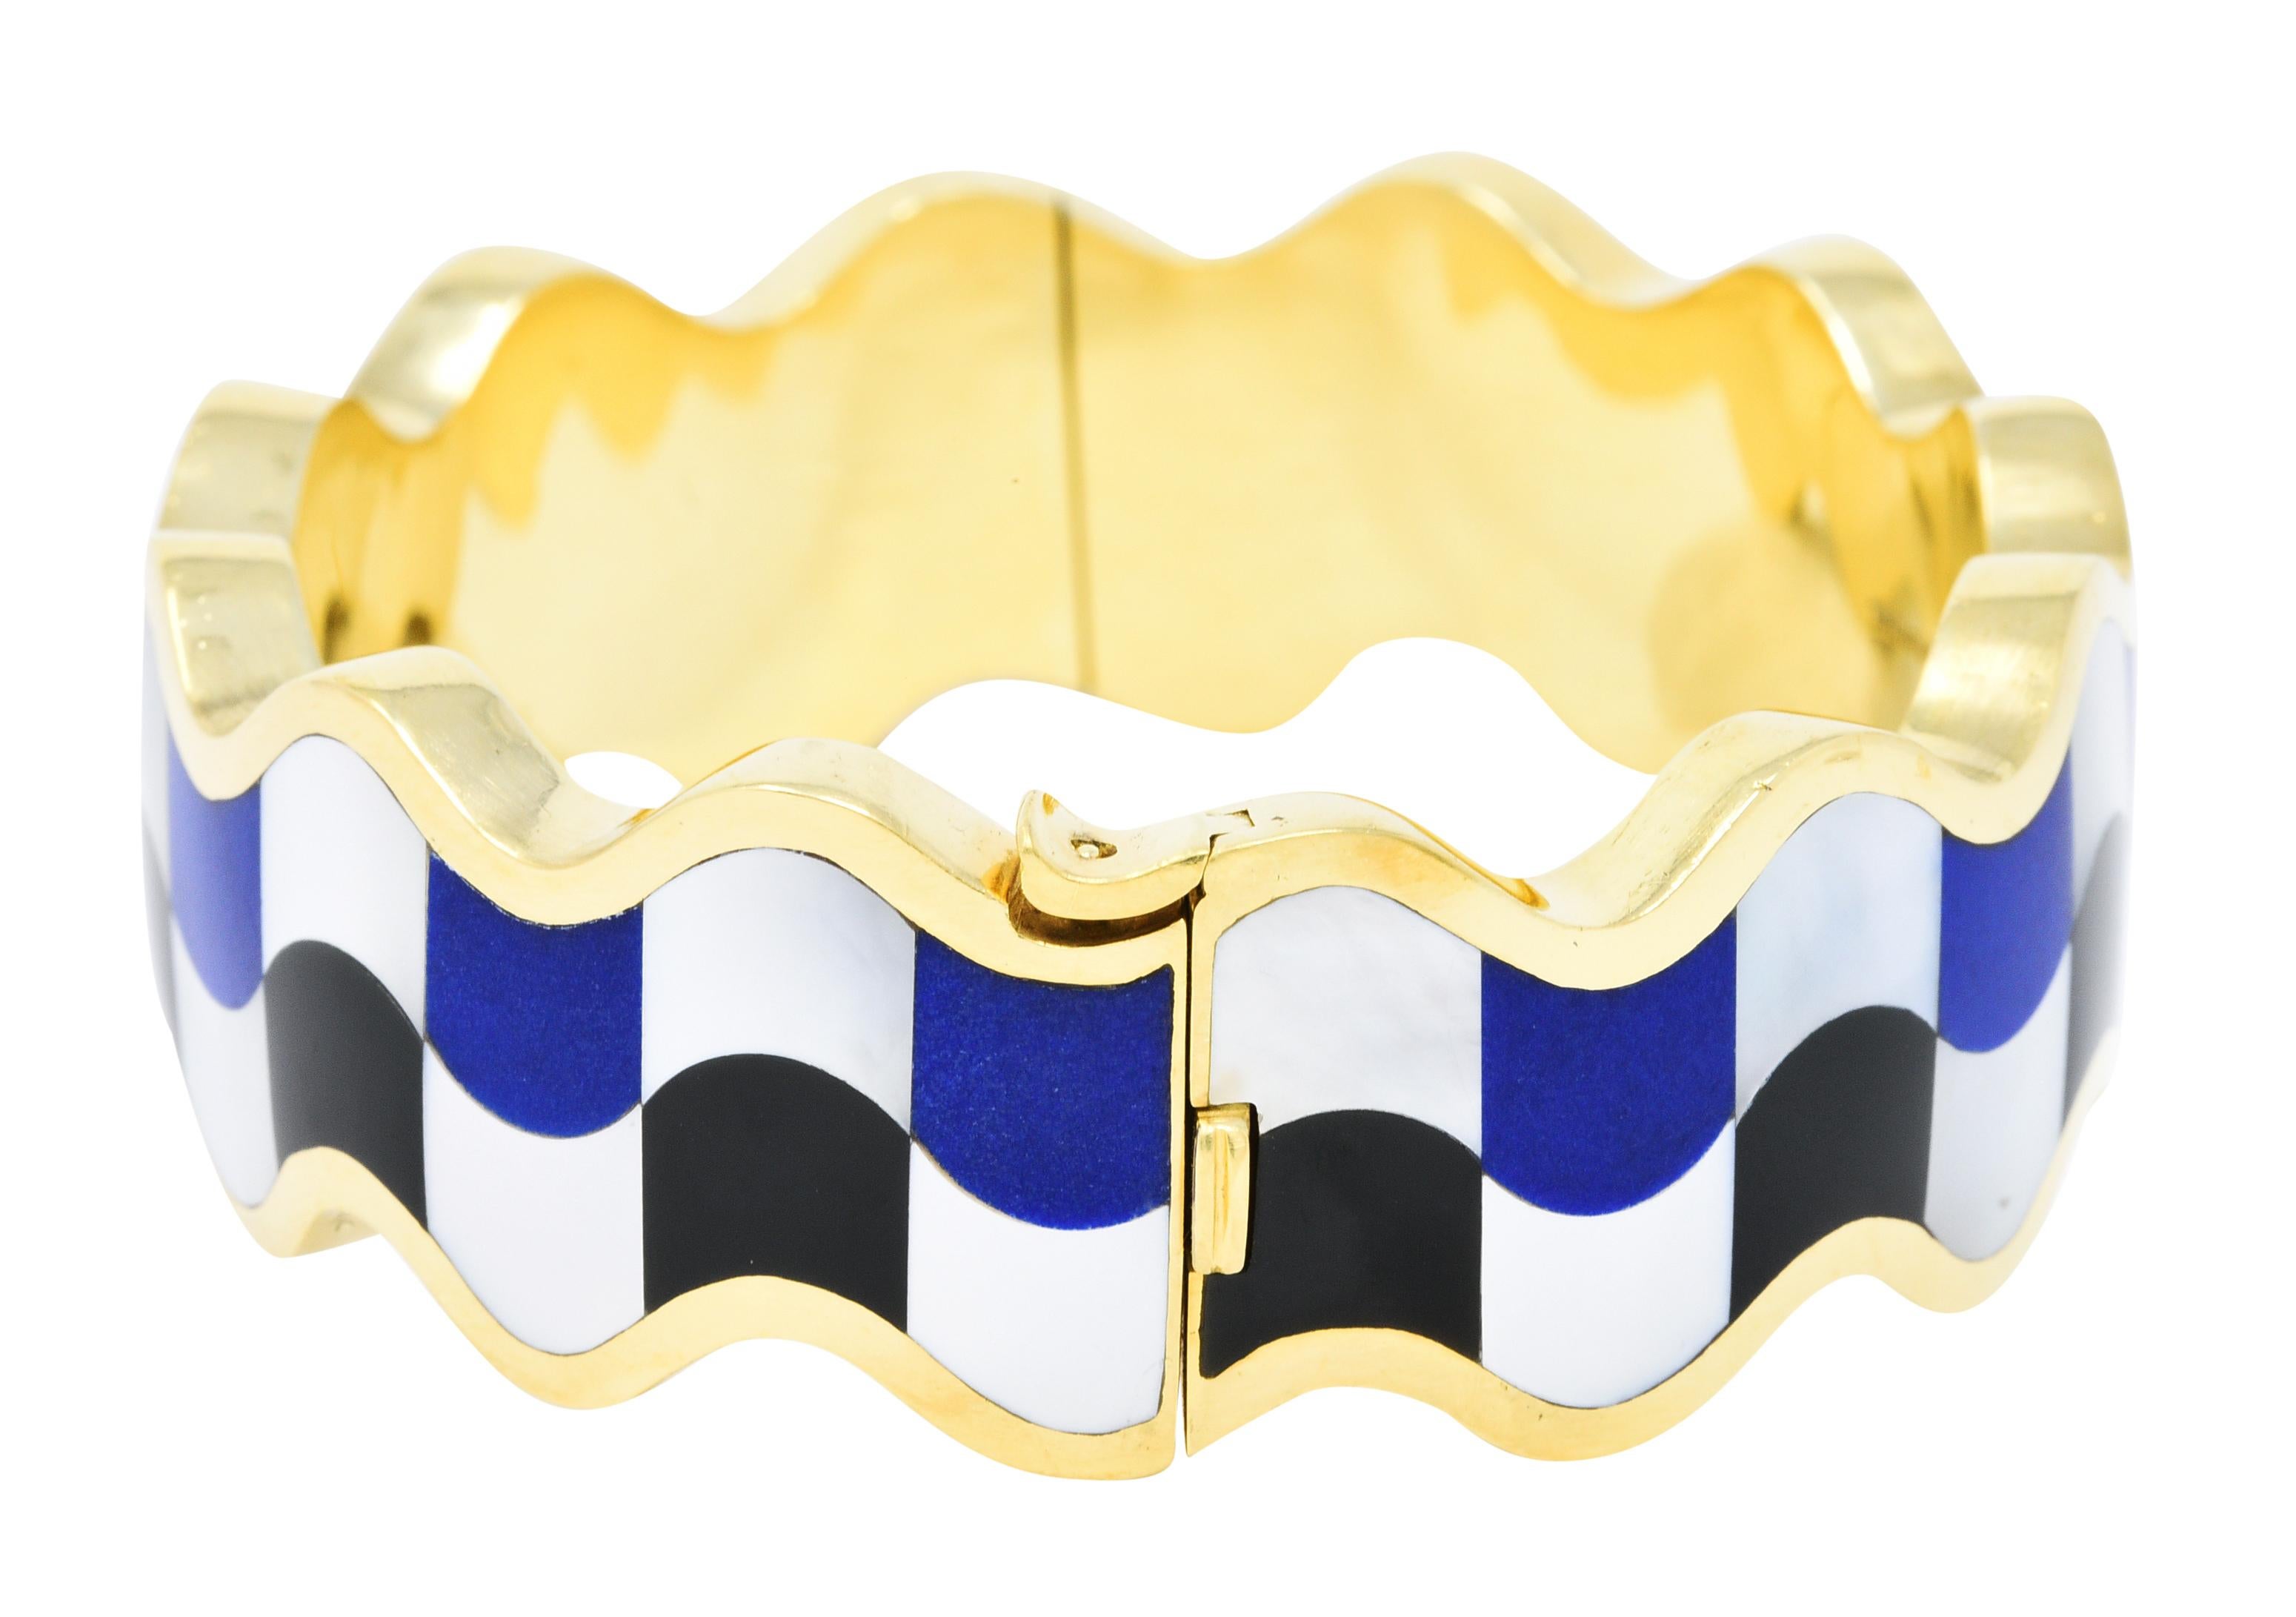 Wavy edged bangle bracelet features an inlaid checkerboard motif

With opaque lapis lazuli, opaque black onyx, and iridescent white mother-of-pearl

Bangle opens on a hinge with the pattern uninterrupted

Completed by a concealed clasp with a fold